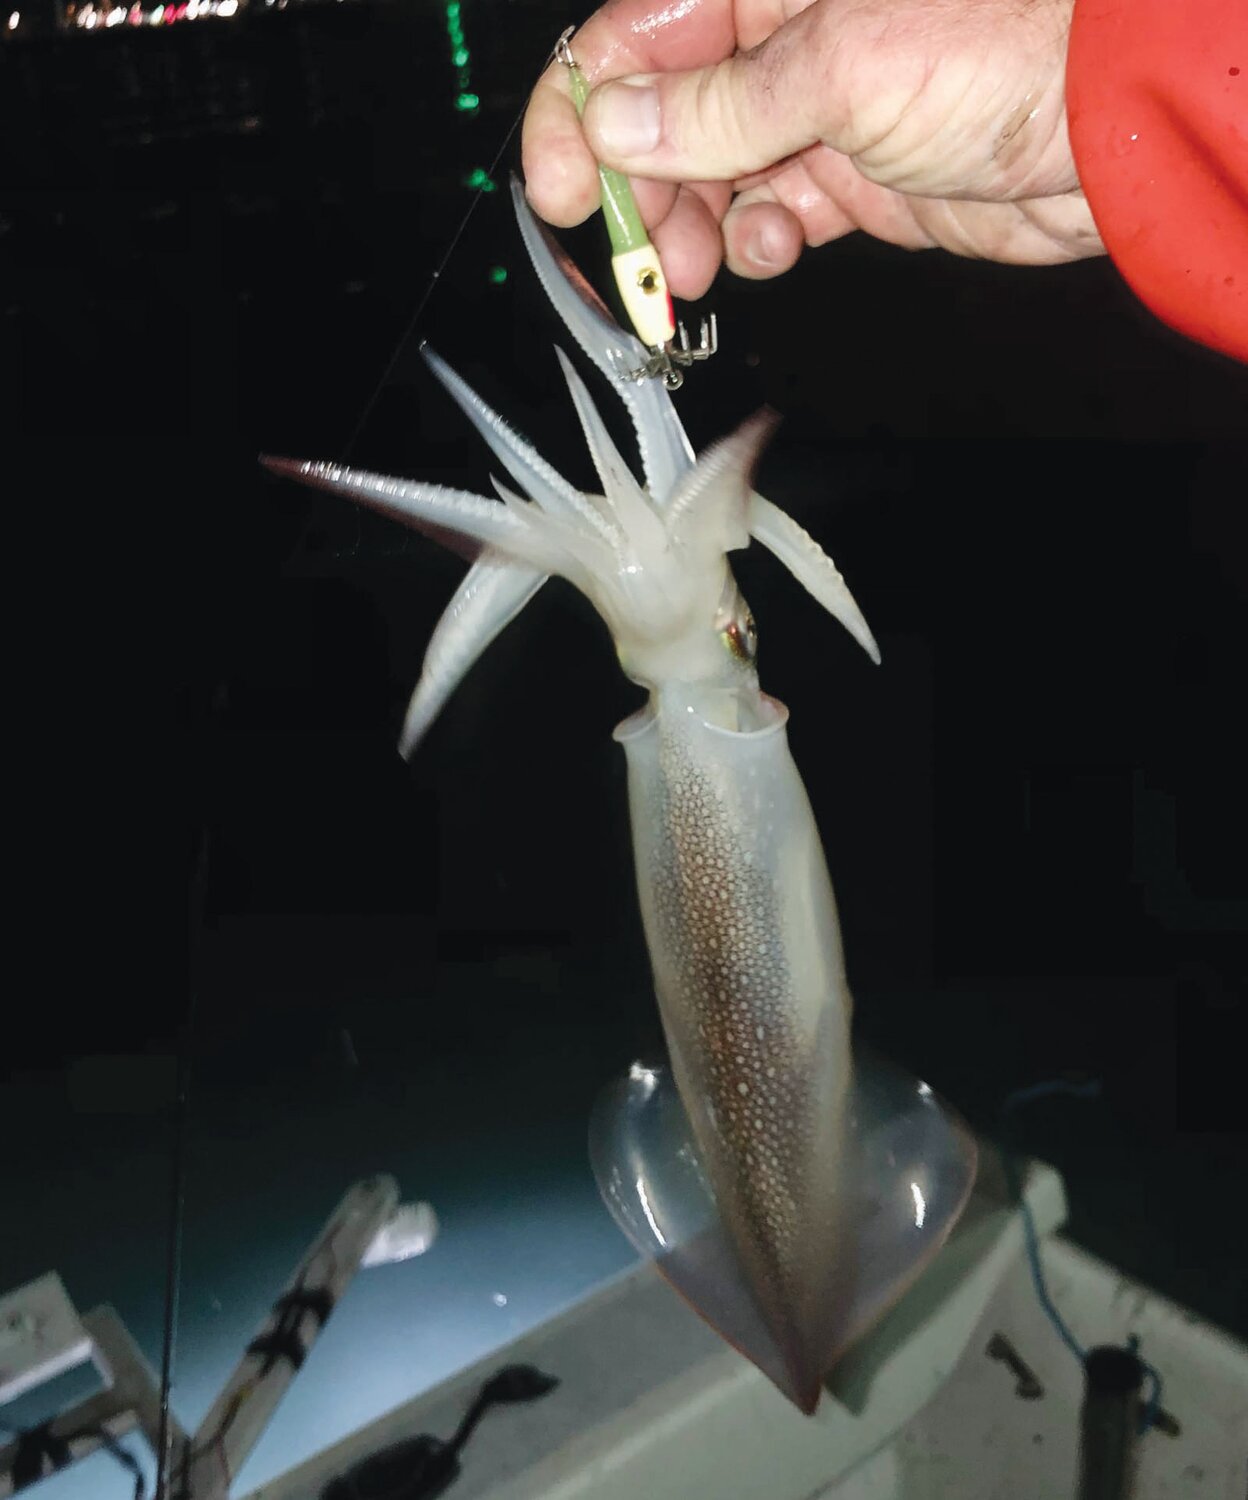 SQUID WITH JIG:  Squid jig with a Newport area squid caught by Greg Vespe and Phil Duckett, Jr. last Friday night.